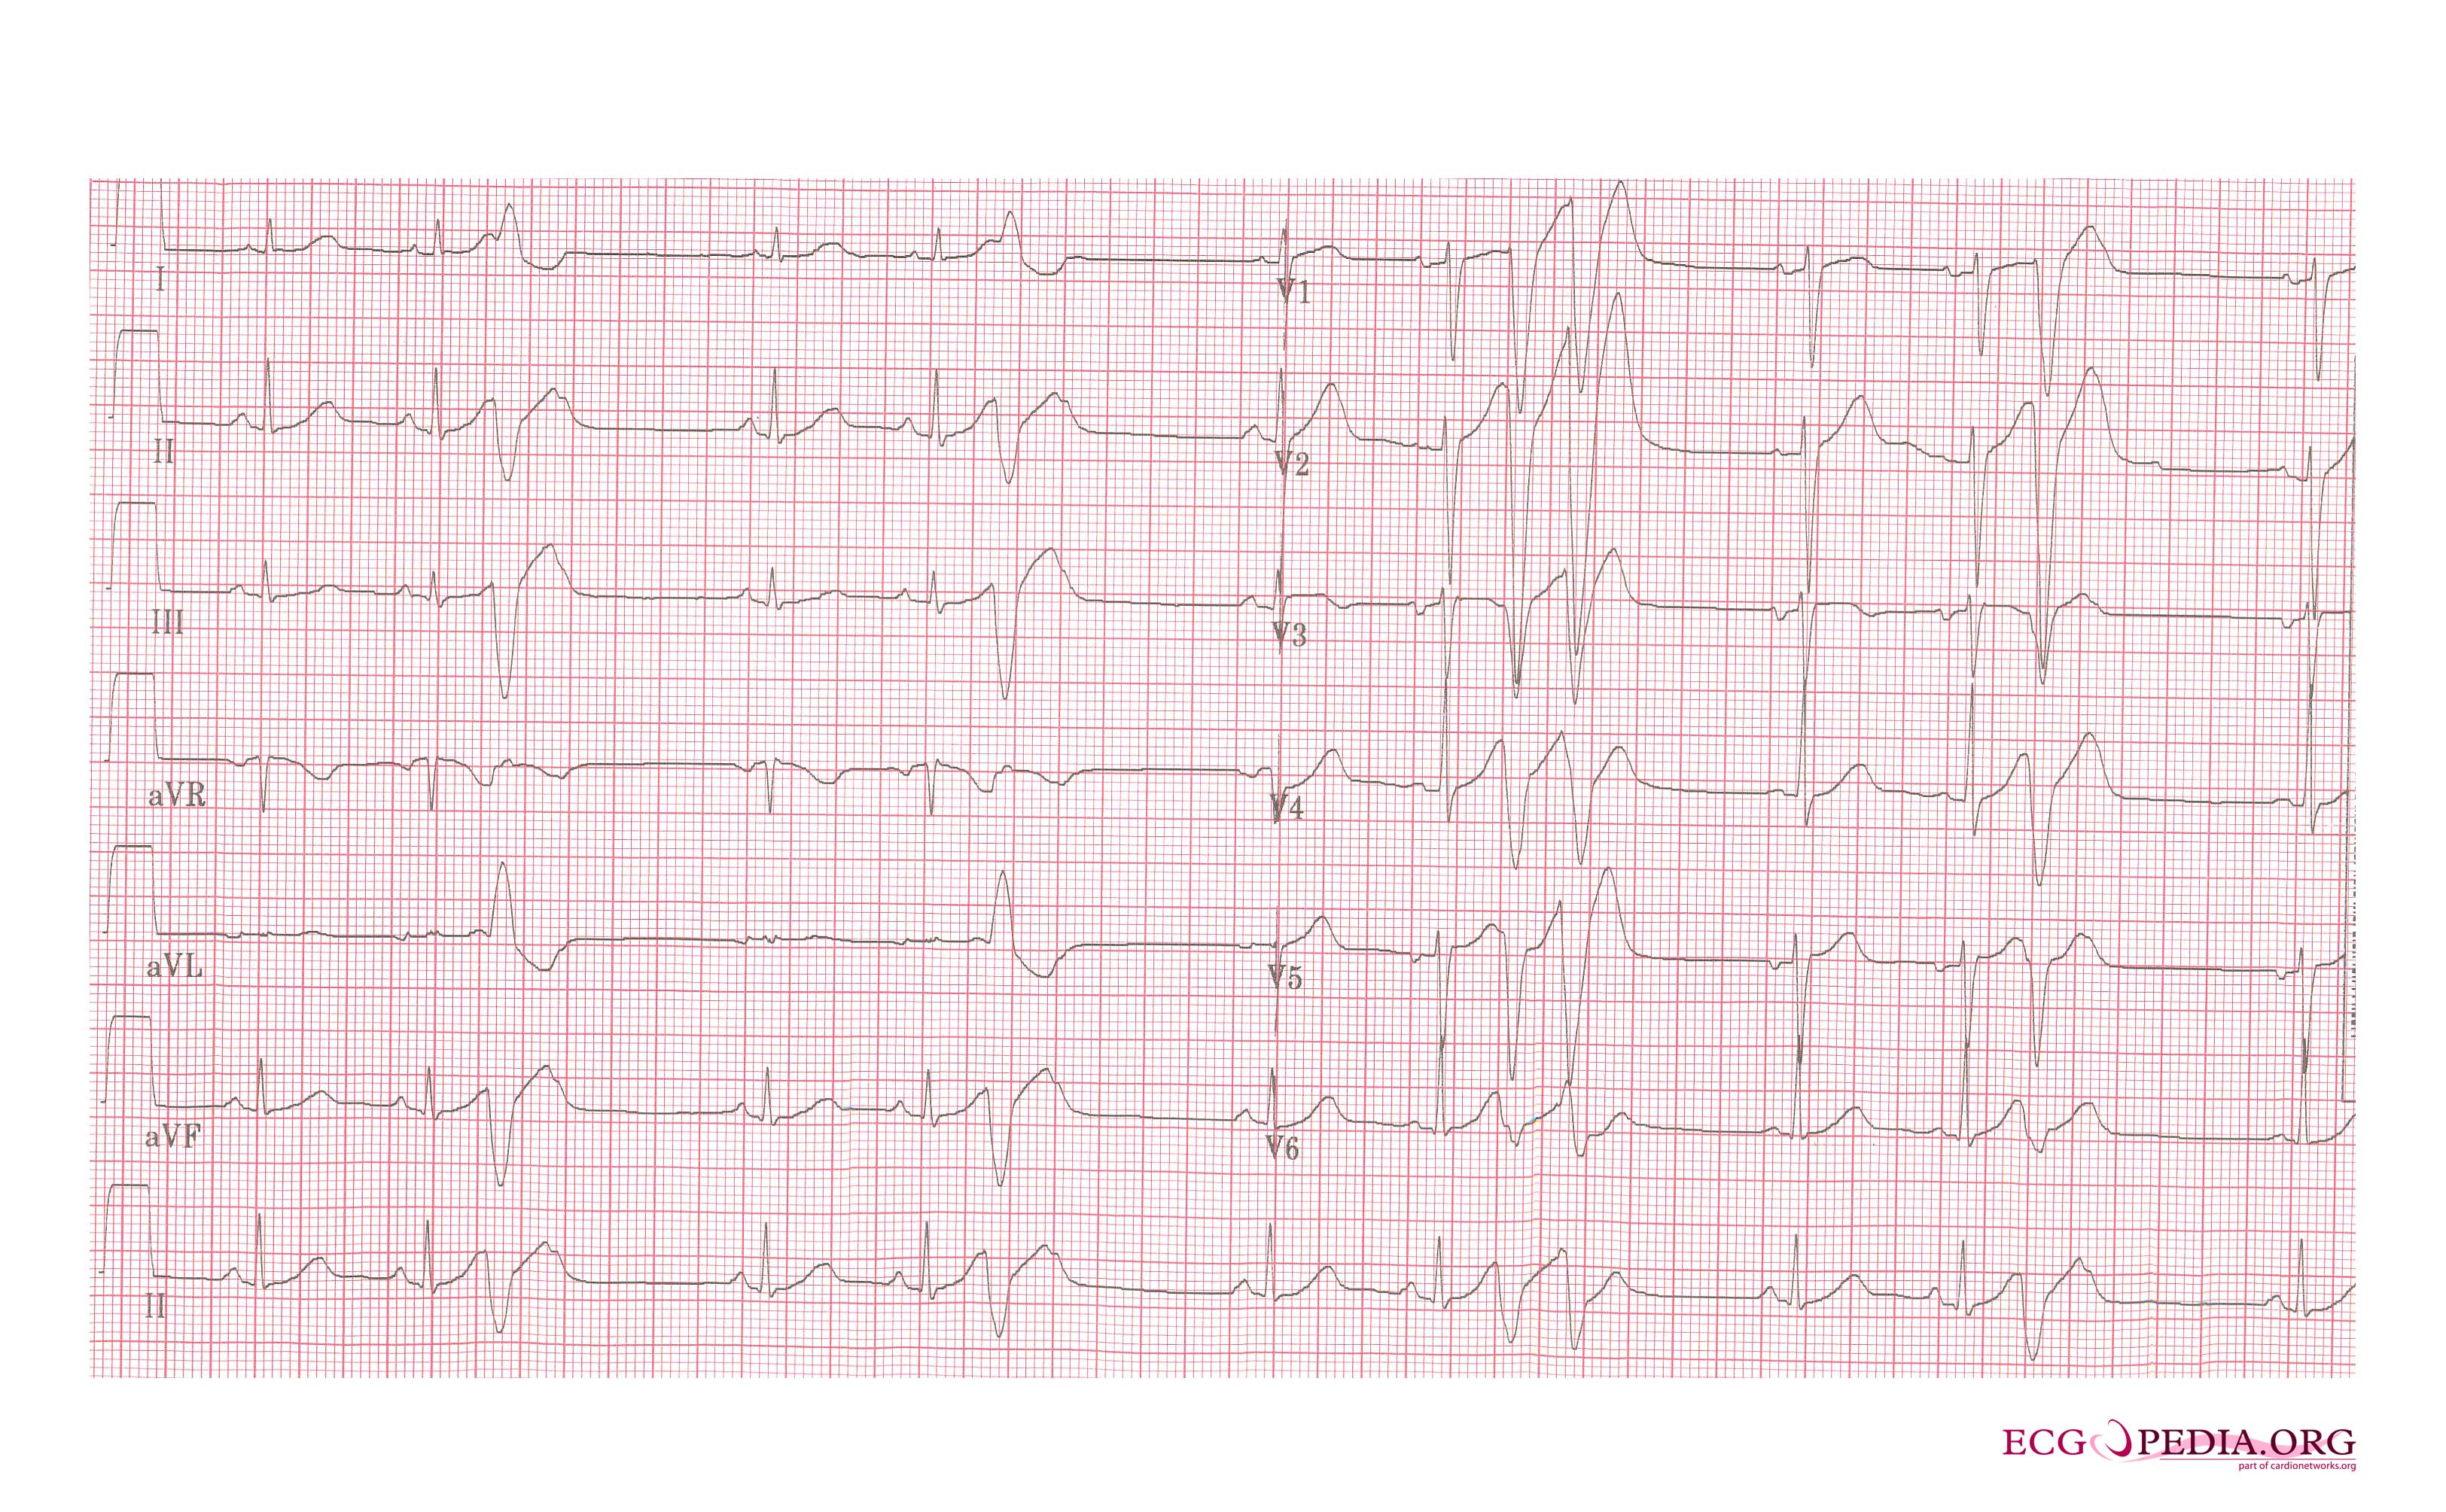 Arrhythmias in a patient with short coupled torsade de pointes: frequent short coupled extrasystoles[7]